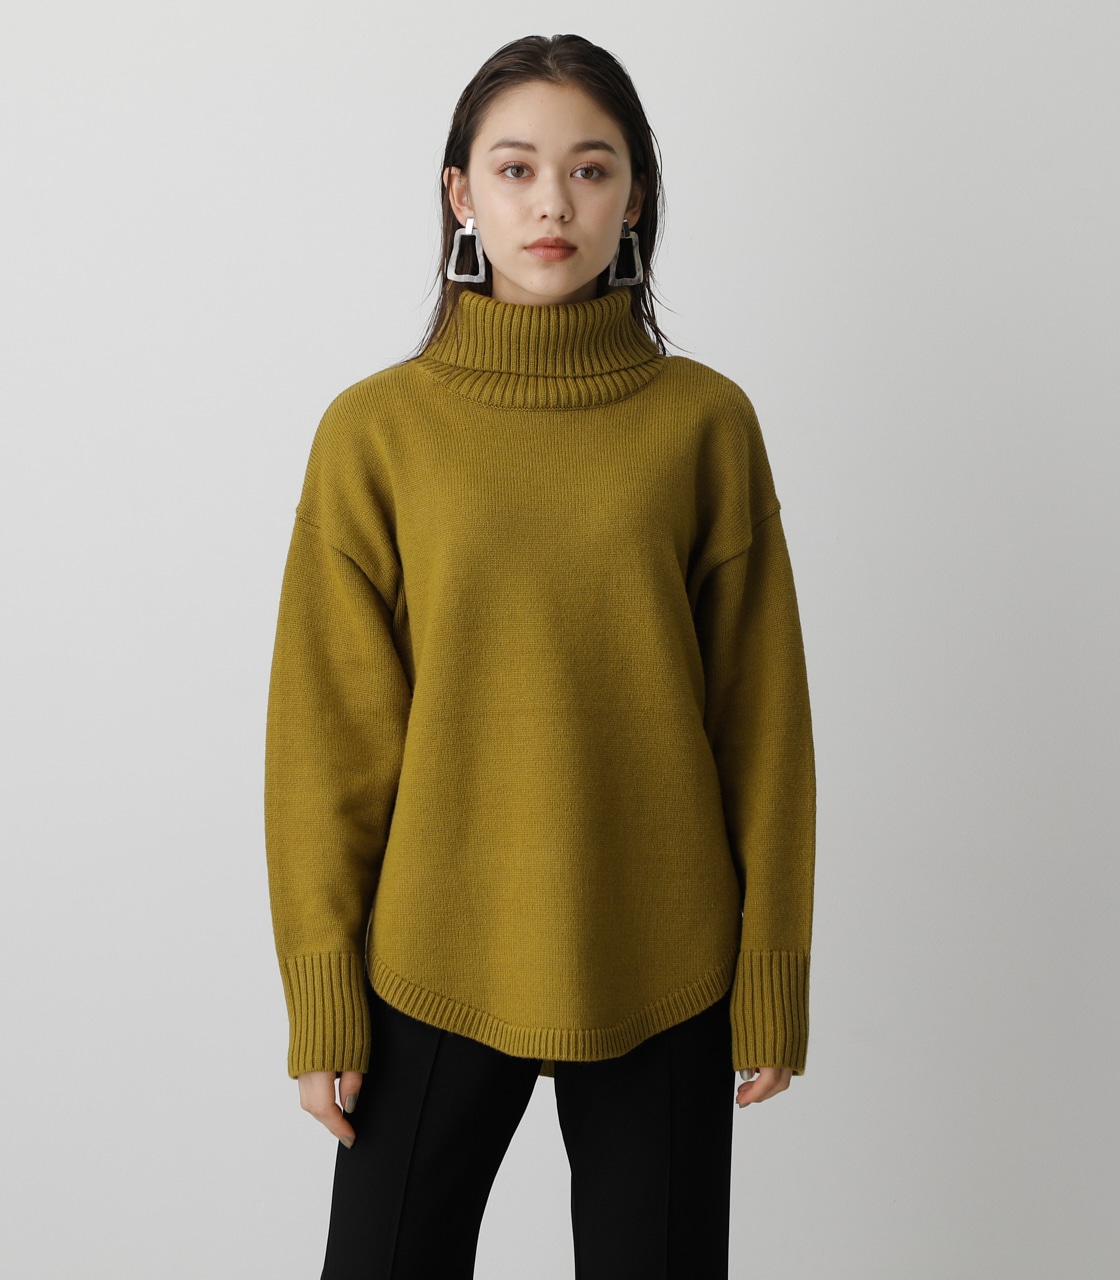 BIG TURTLE KNIT TOPS/ビッグタートルニットトップス 詳細画像 LIME 5